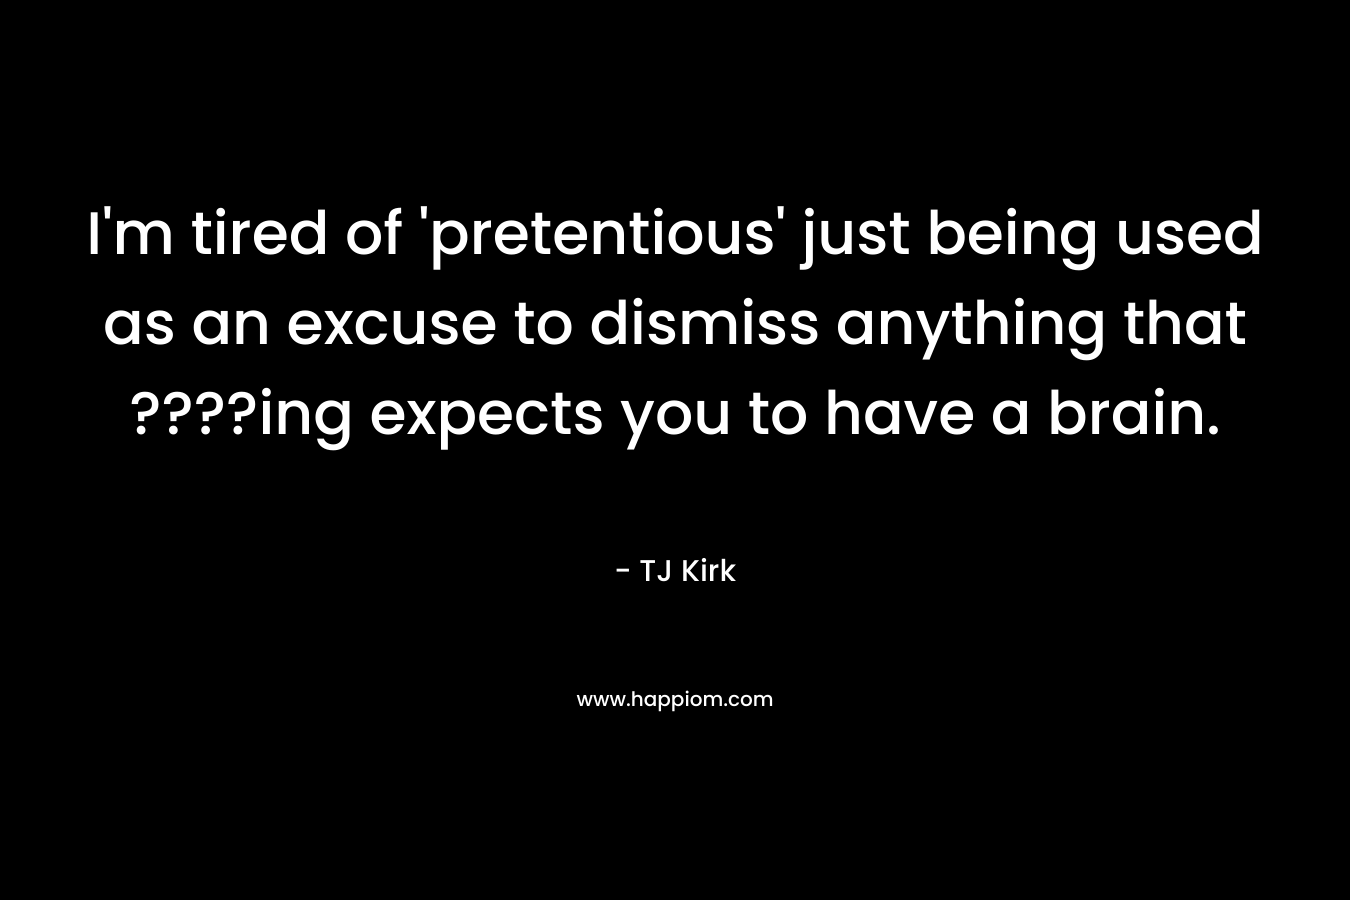 I'm tired of 'pretentious' just being used as an excuse to dismiss anything that ????ing expects you to have a brain.